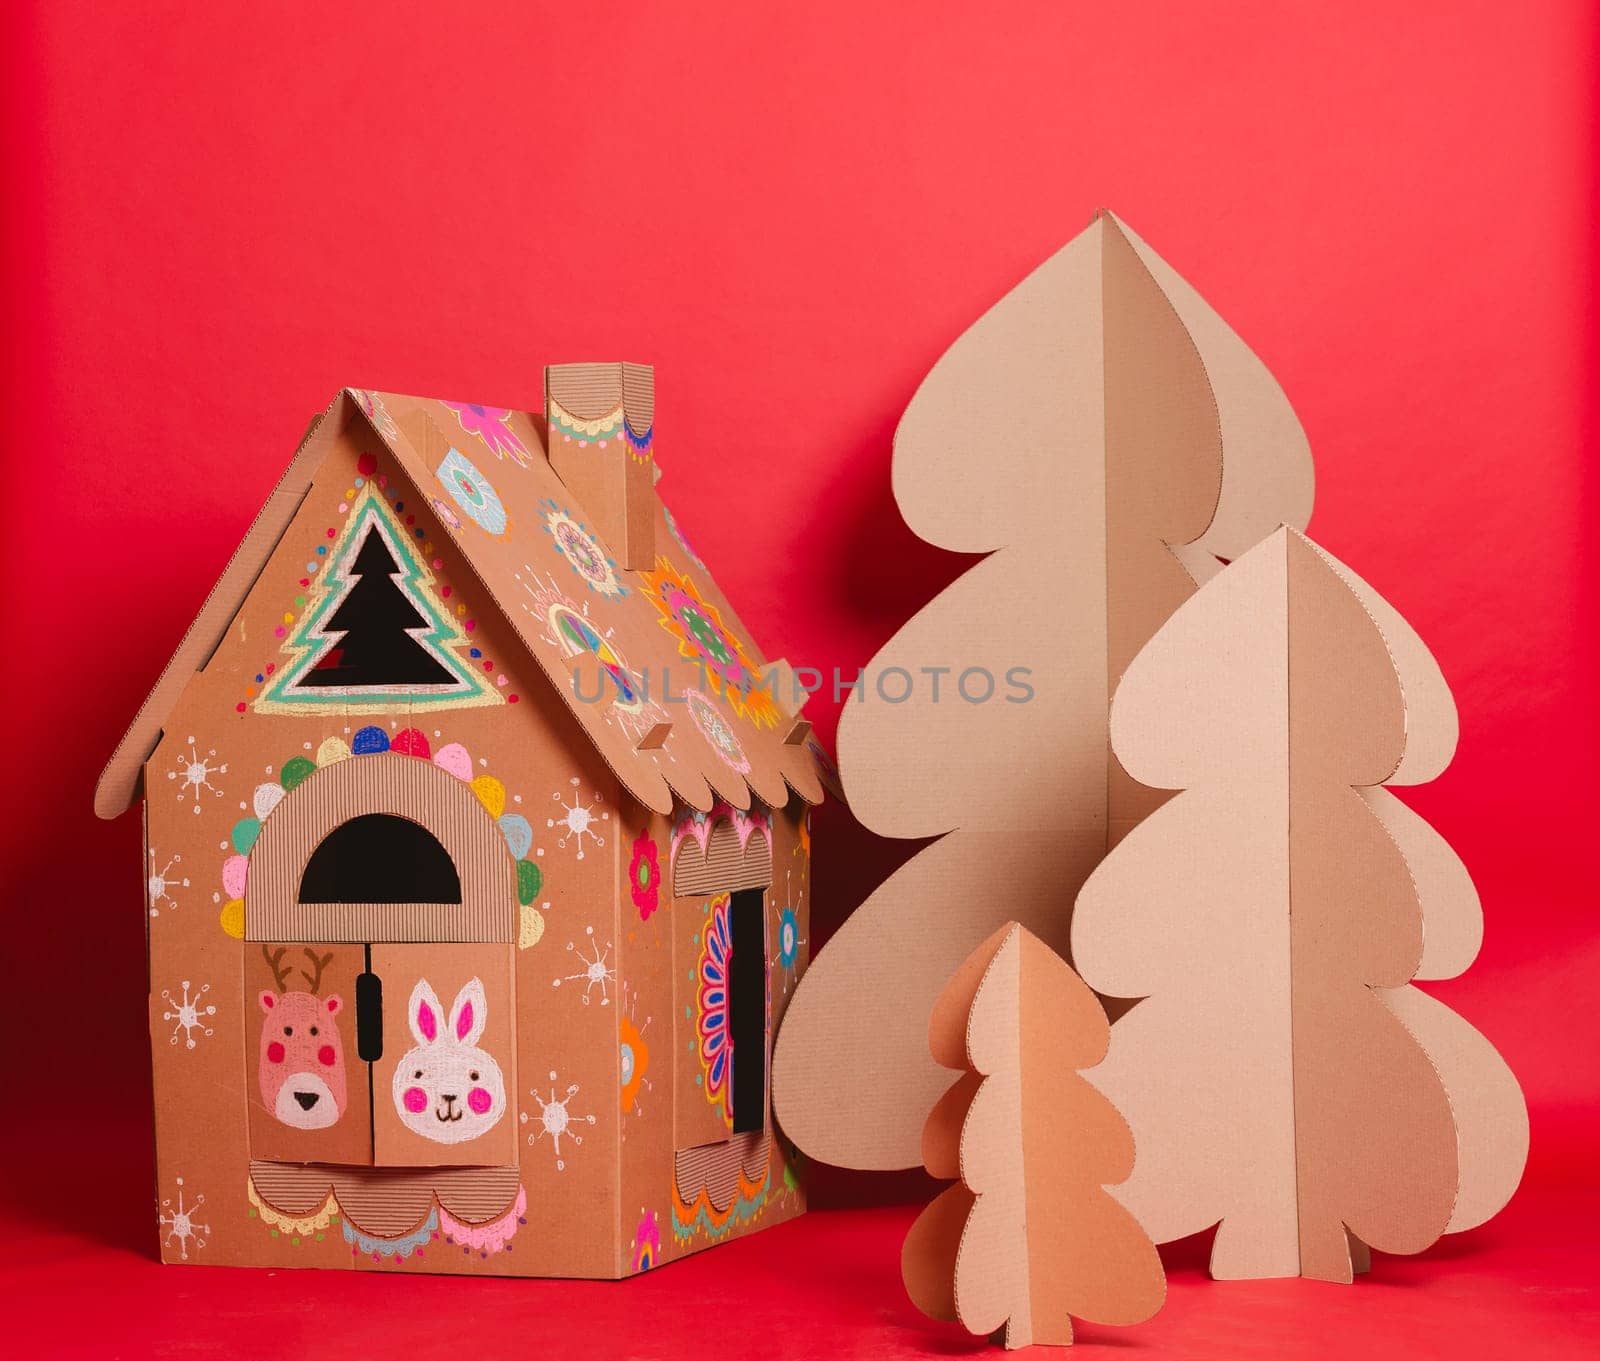 Christmas Tree and Cardboard playhouse Made Of Cardboard. Unique Trees. New Year by sarymsakov